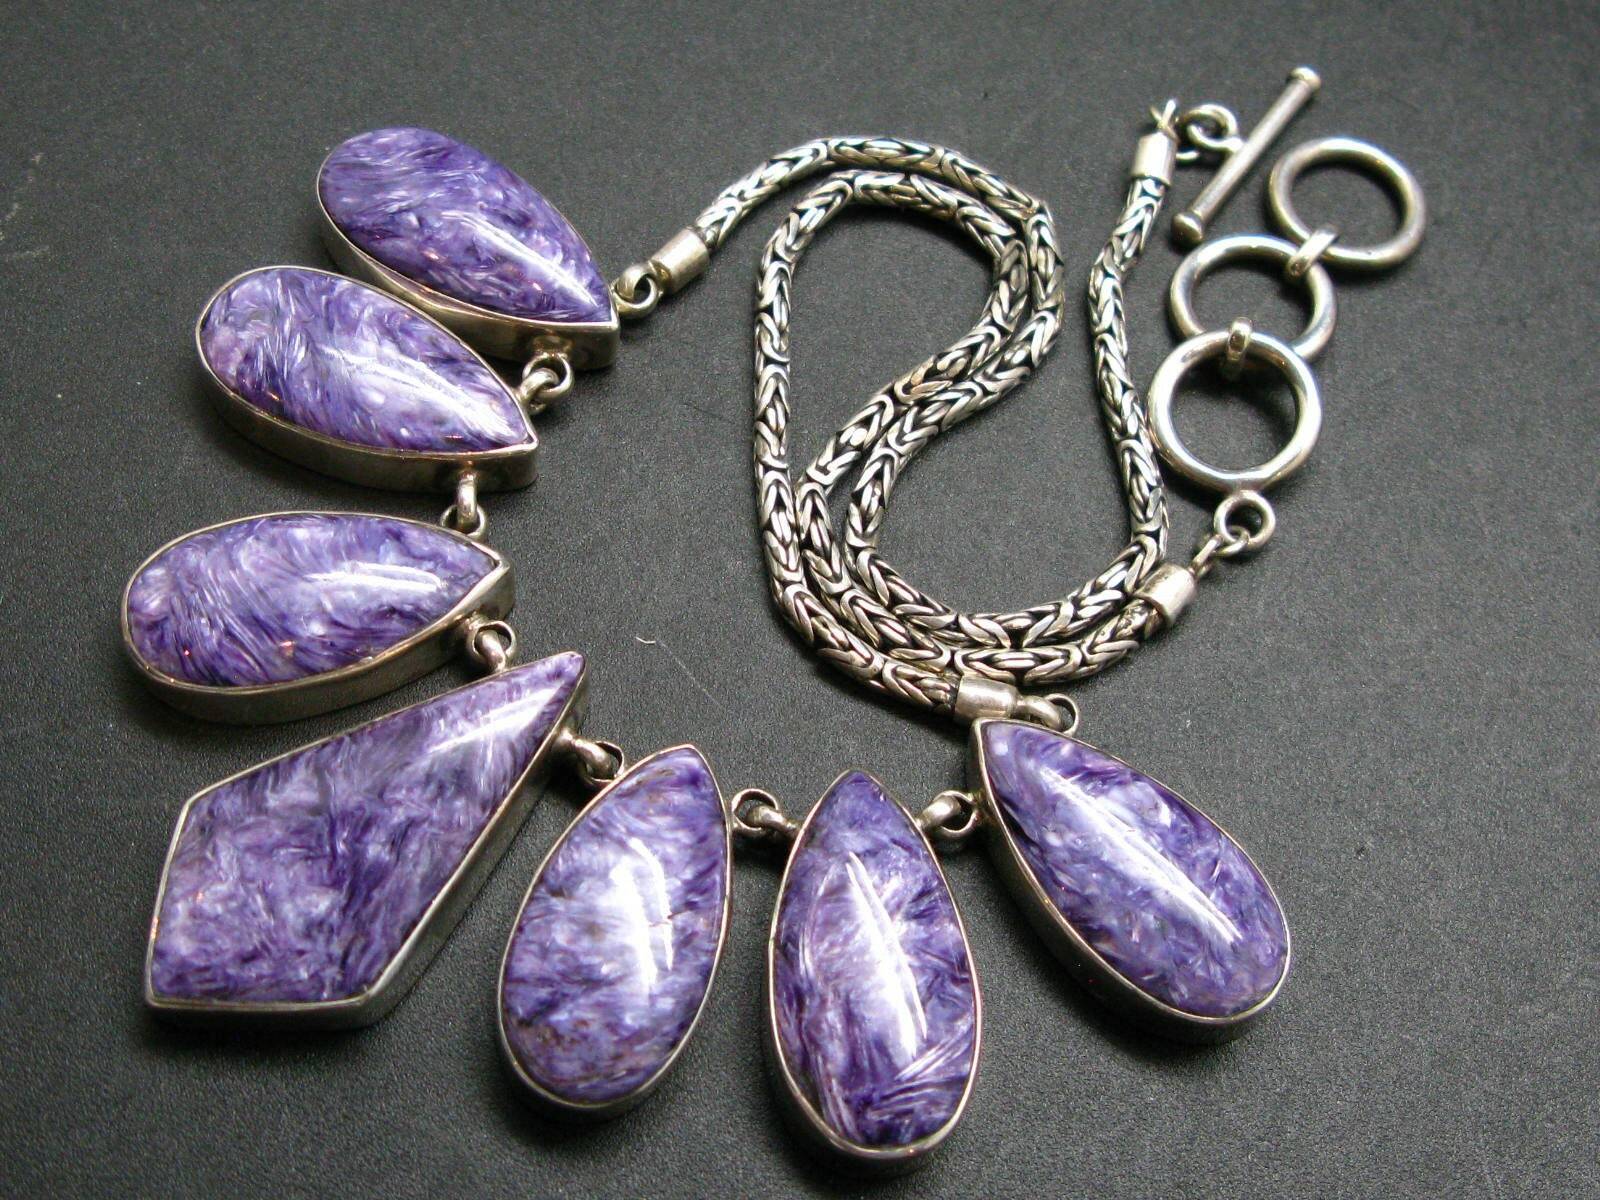 Stunning Silky Charoite AAA Quality Sterling Silver Necklace From Russia